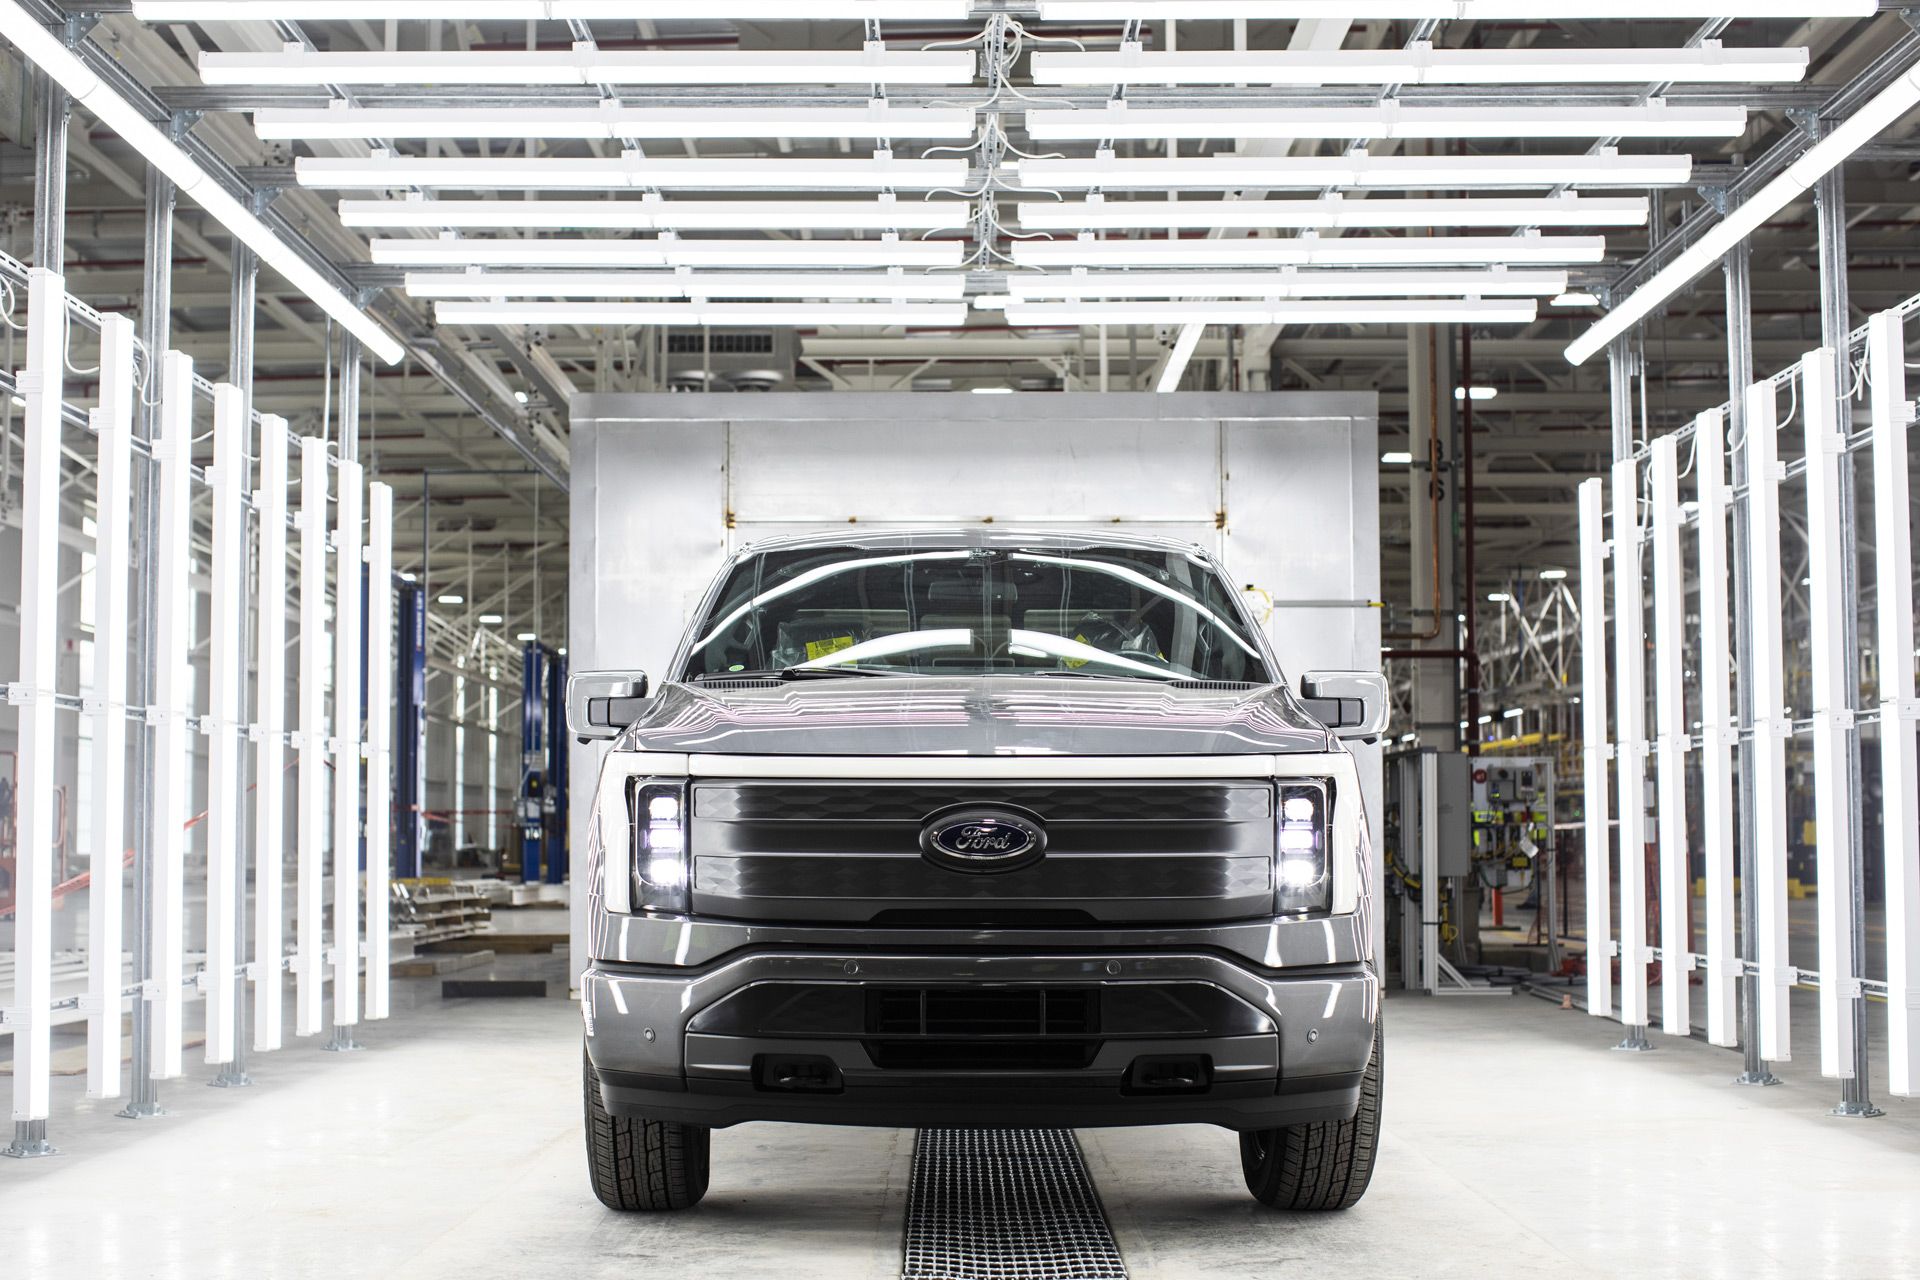 Ford F-150 Lightning EV production boosted to 150,000 annually, orders start this weekFord F-150 Lightning EV production boosted to 150,000 annually, orders start this week